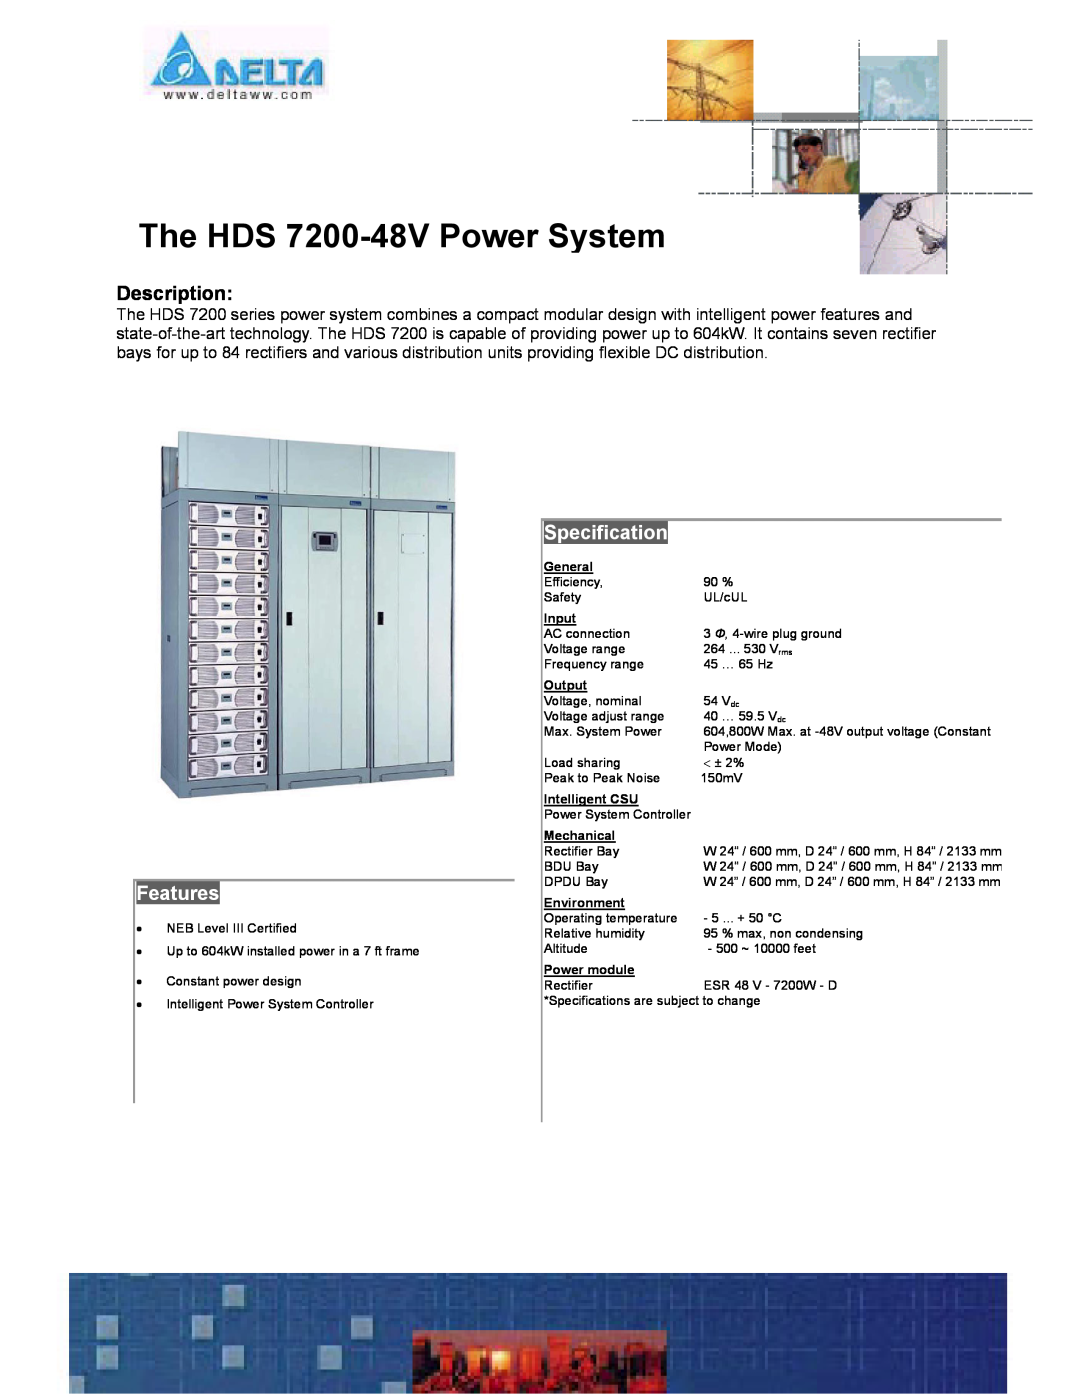 Delta specifications The HDS 7200-48V Power System, Description, Features, Specification, General, Input, Output 